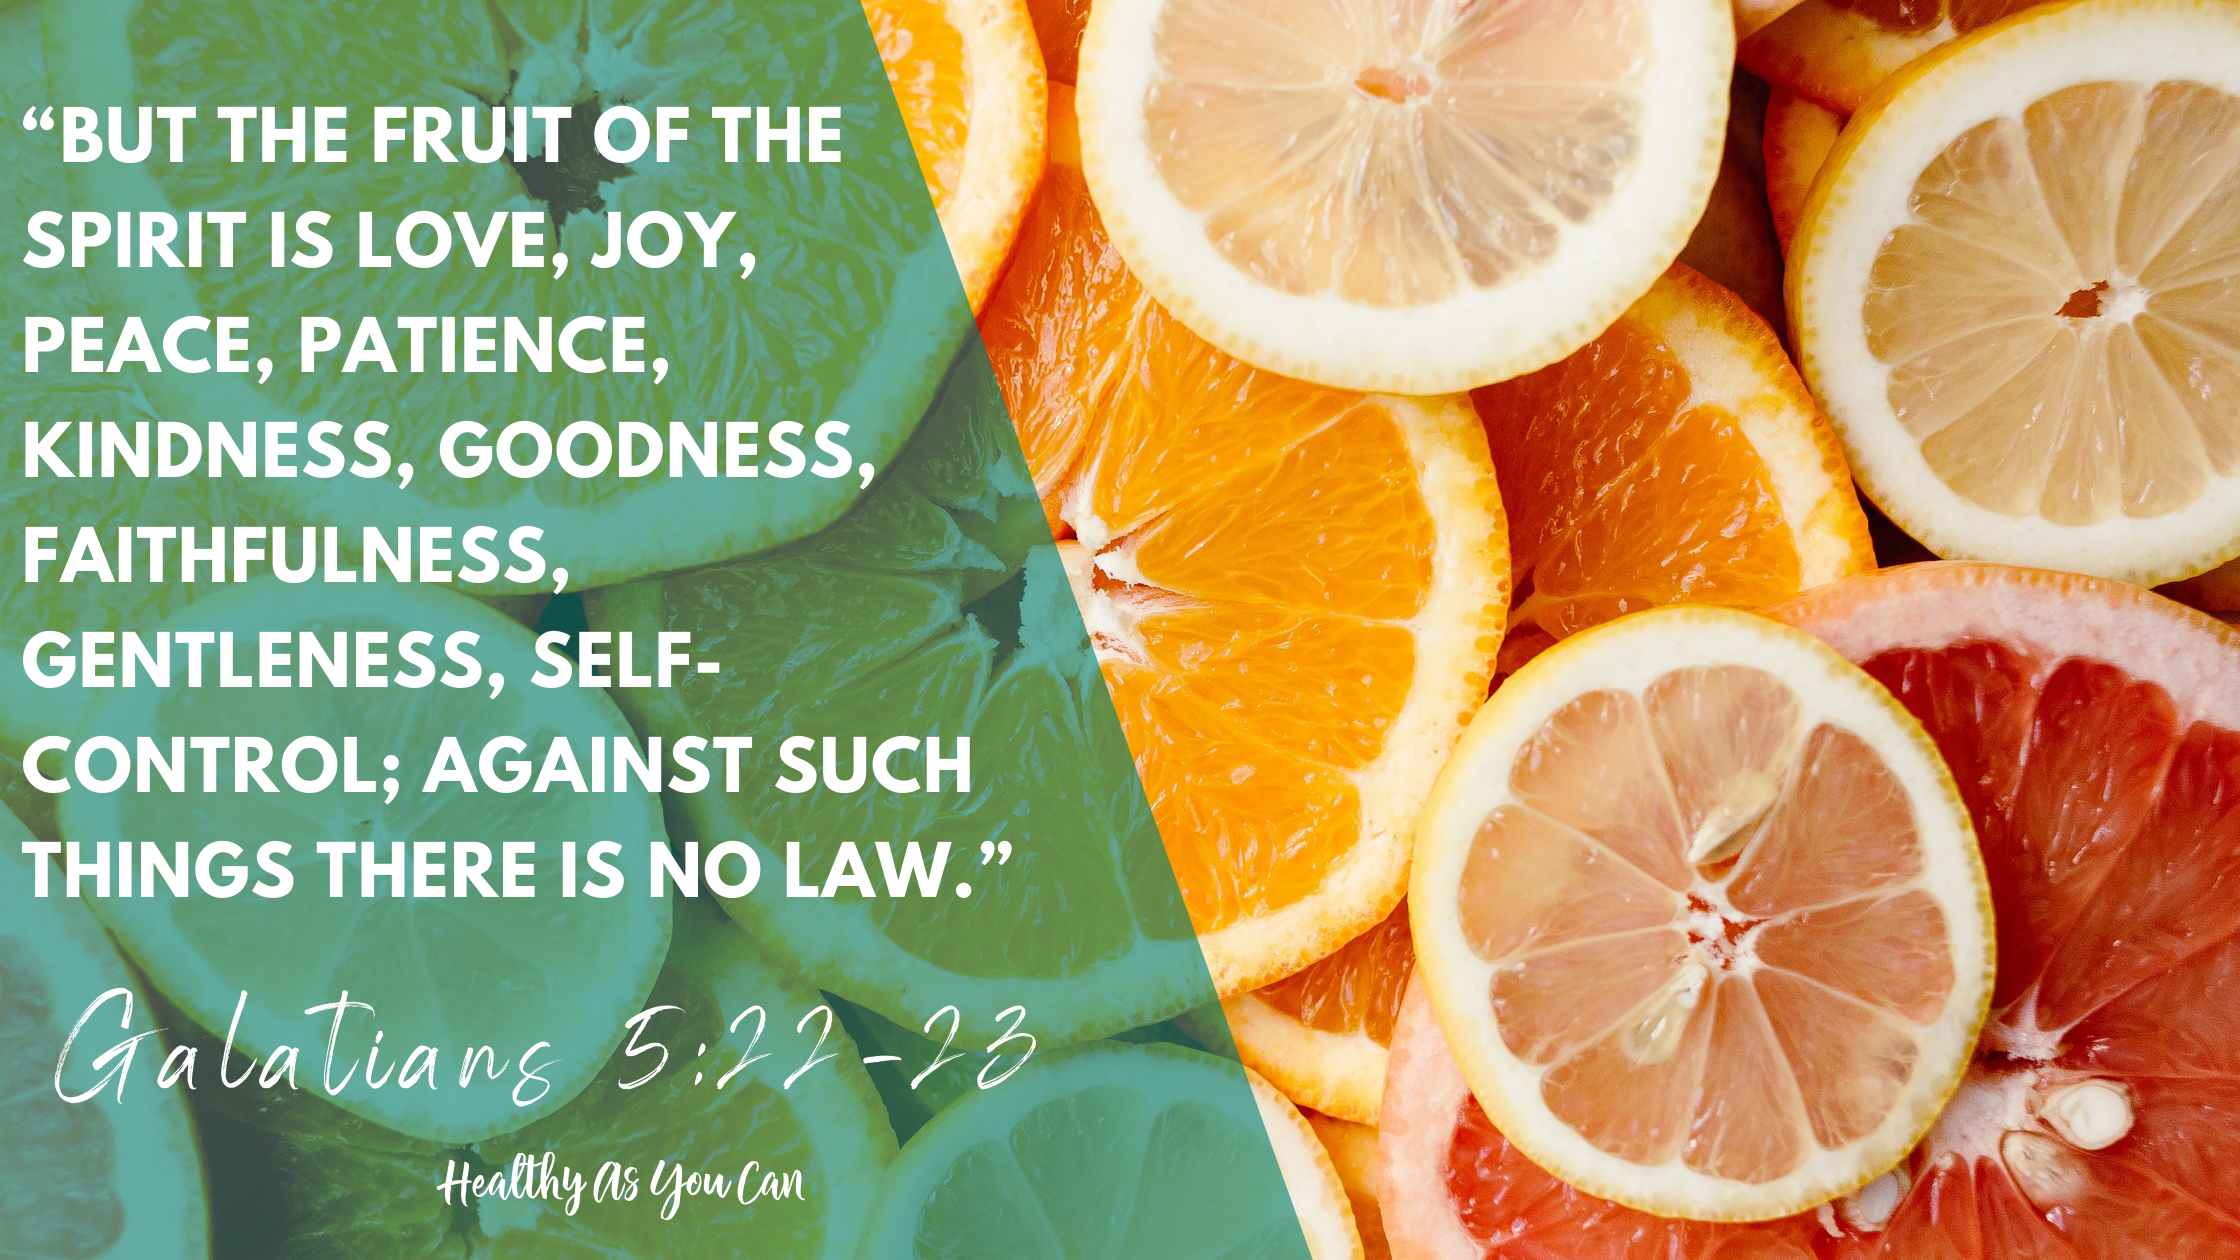 orange slices; blue overlay with white lettering “But the fruit of the Spirit is love, joy, peace, patience, kindness, goodness, faithfulness, gentleness, self-control; against such things there is no law.” Galatians 5:22-23